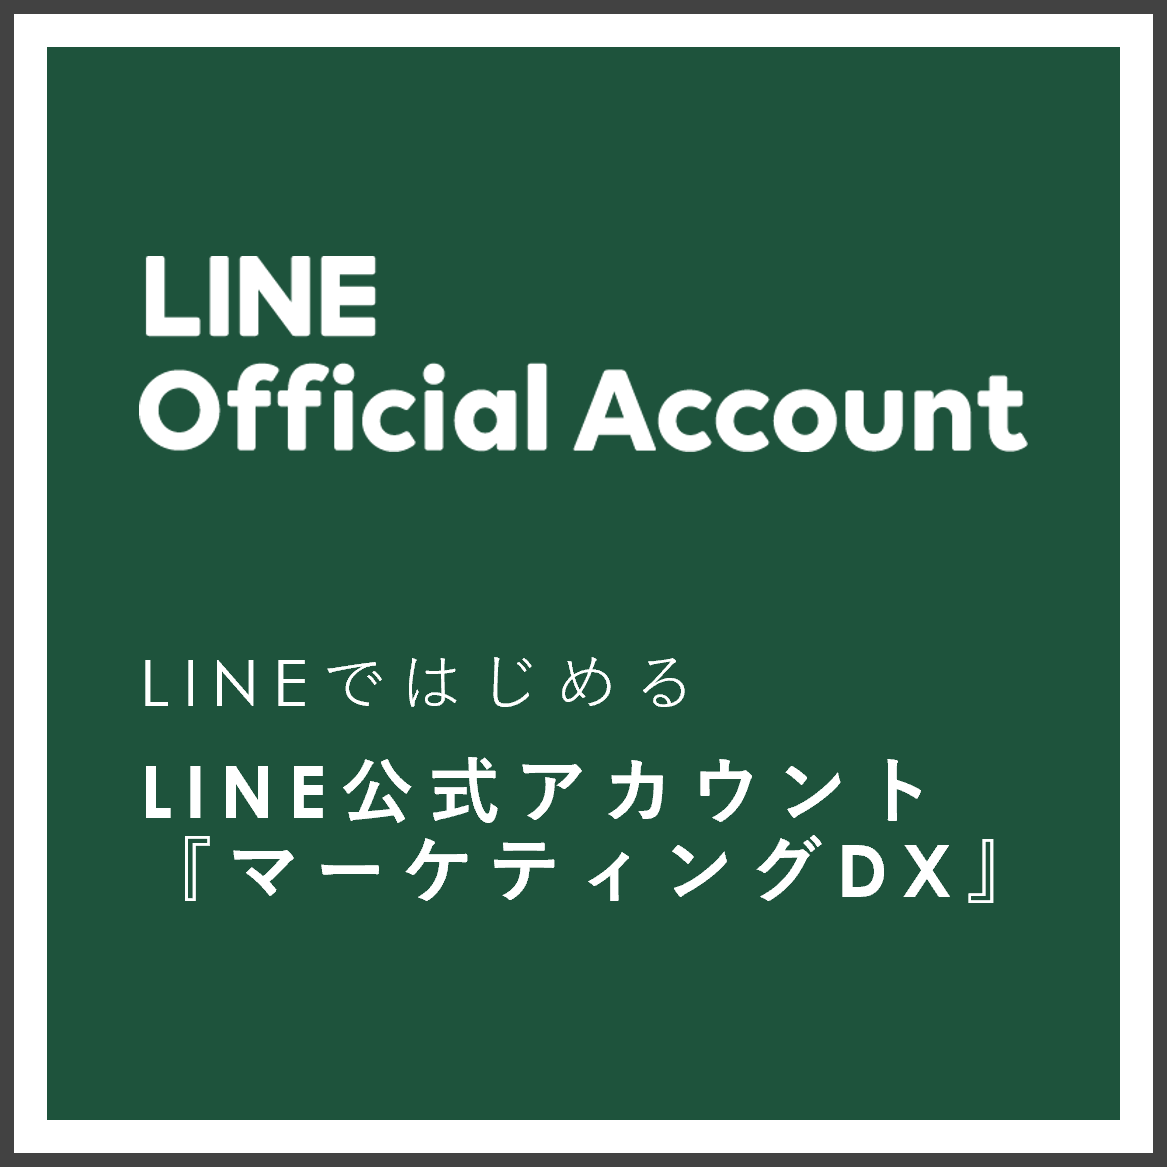 line-official-account-dx-introduction_material